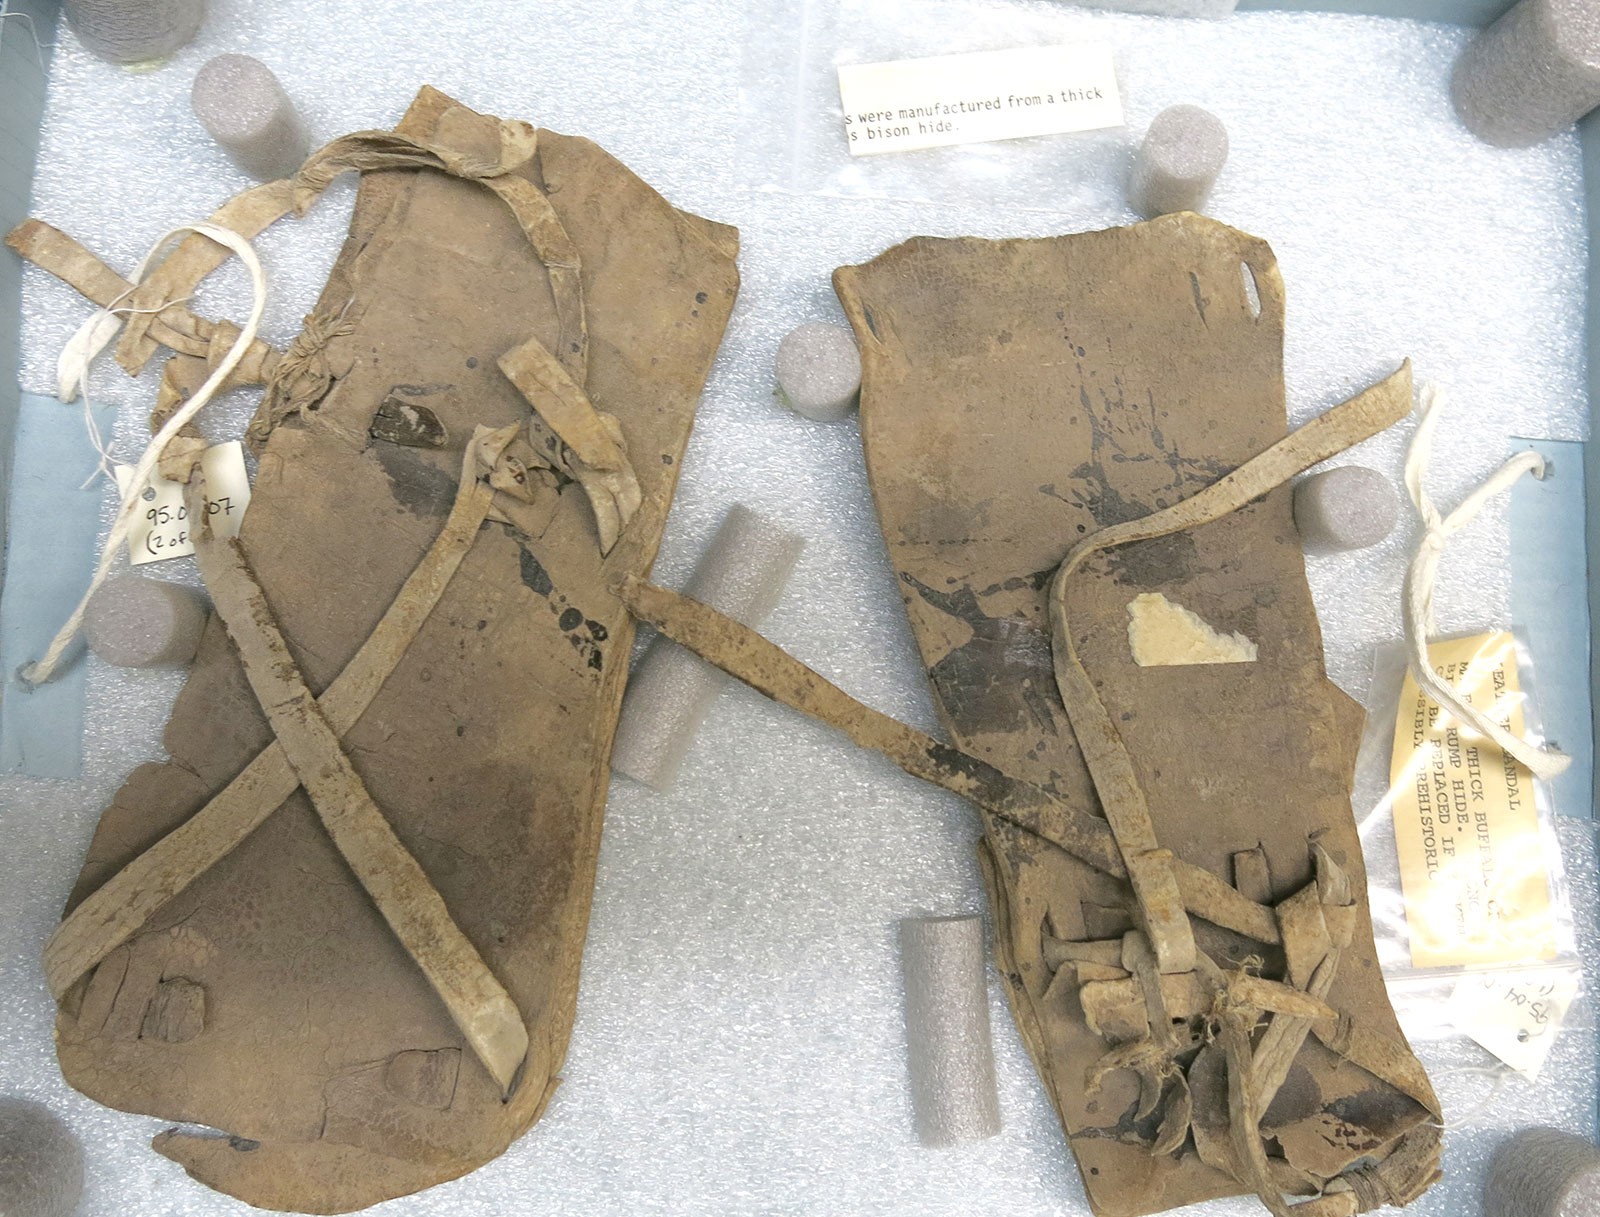 Sandals from the Museum of Anthropology collection.